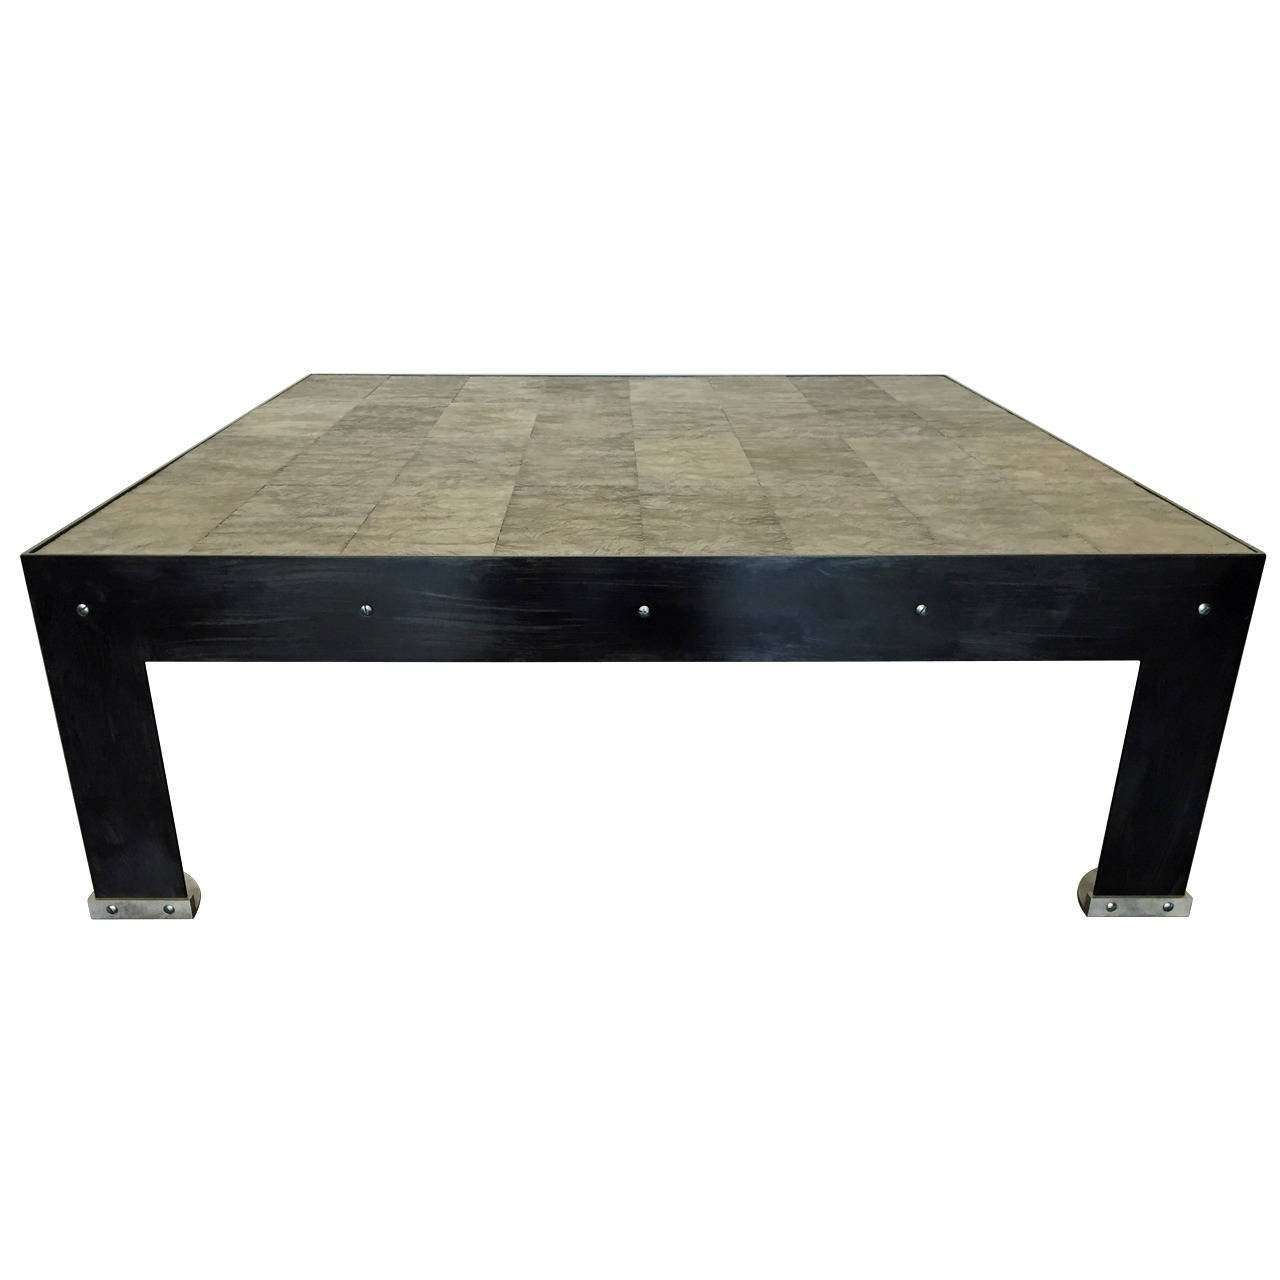 Stunning Paul Dupre Lafon Inspired Coffee Table In Blackened Steel With 2017 Bronze Coffee Tables (View 11 of 20)